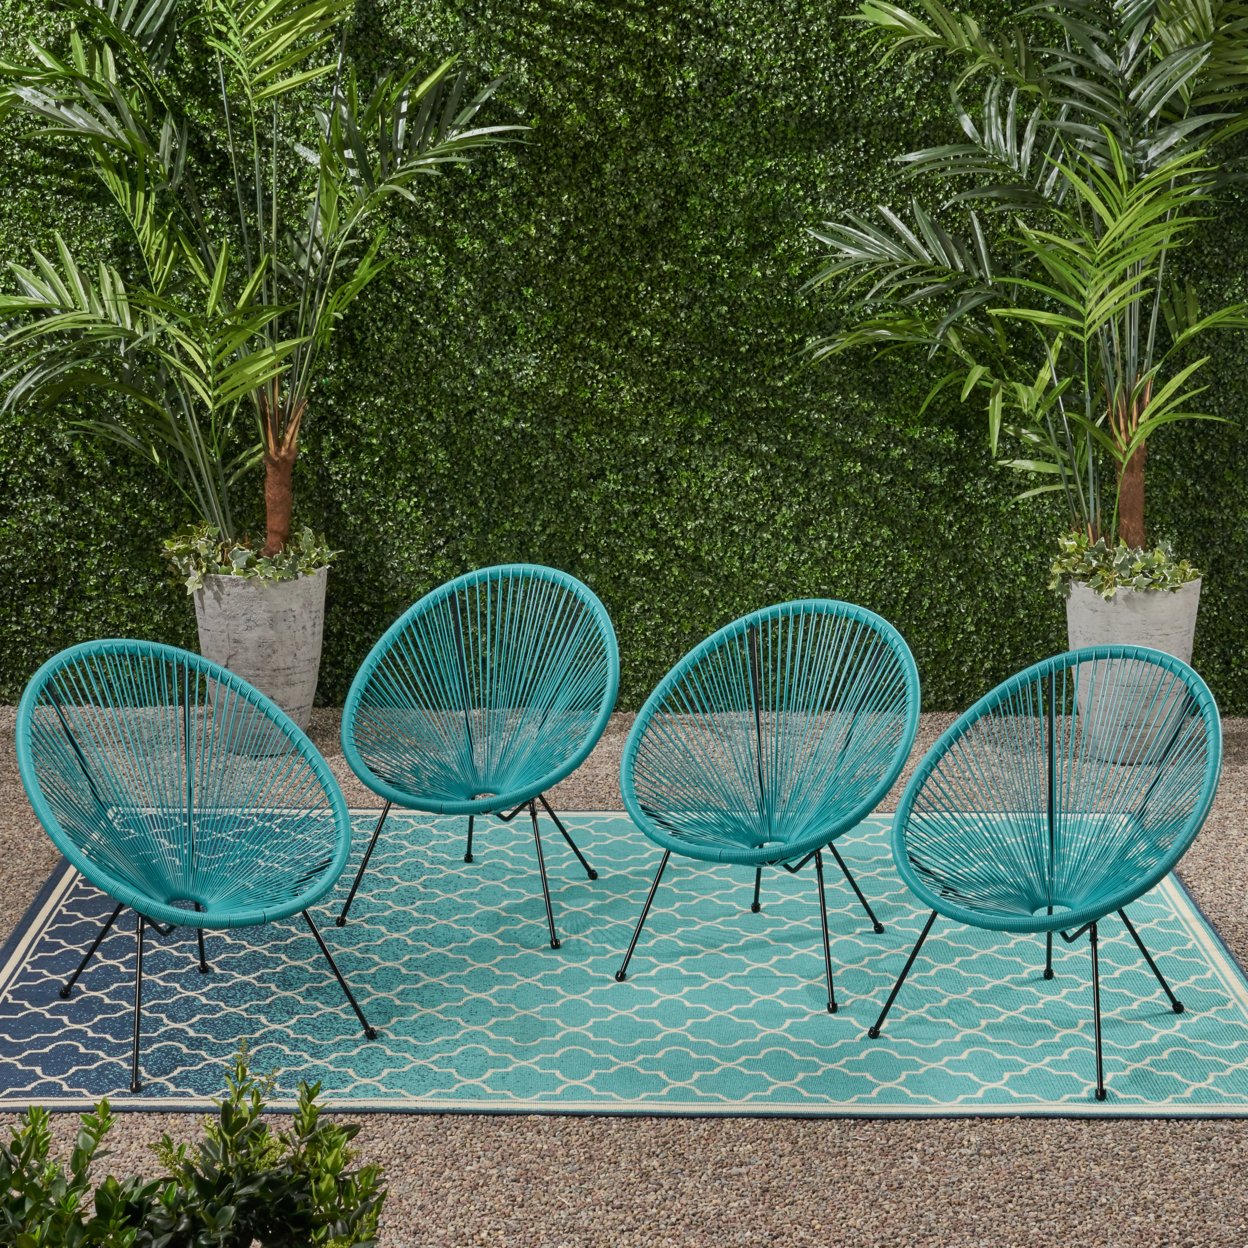 Mia Outdoor Hammock Weave Chair With Steel Frame (Set Of 4) - Teal + Black